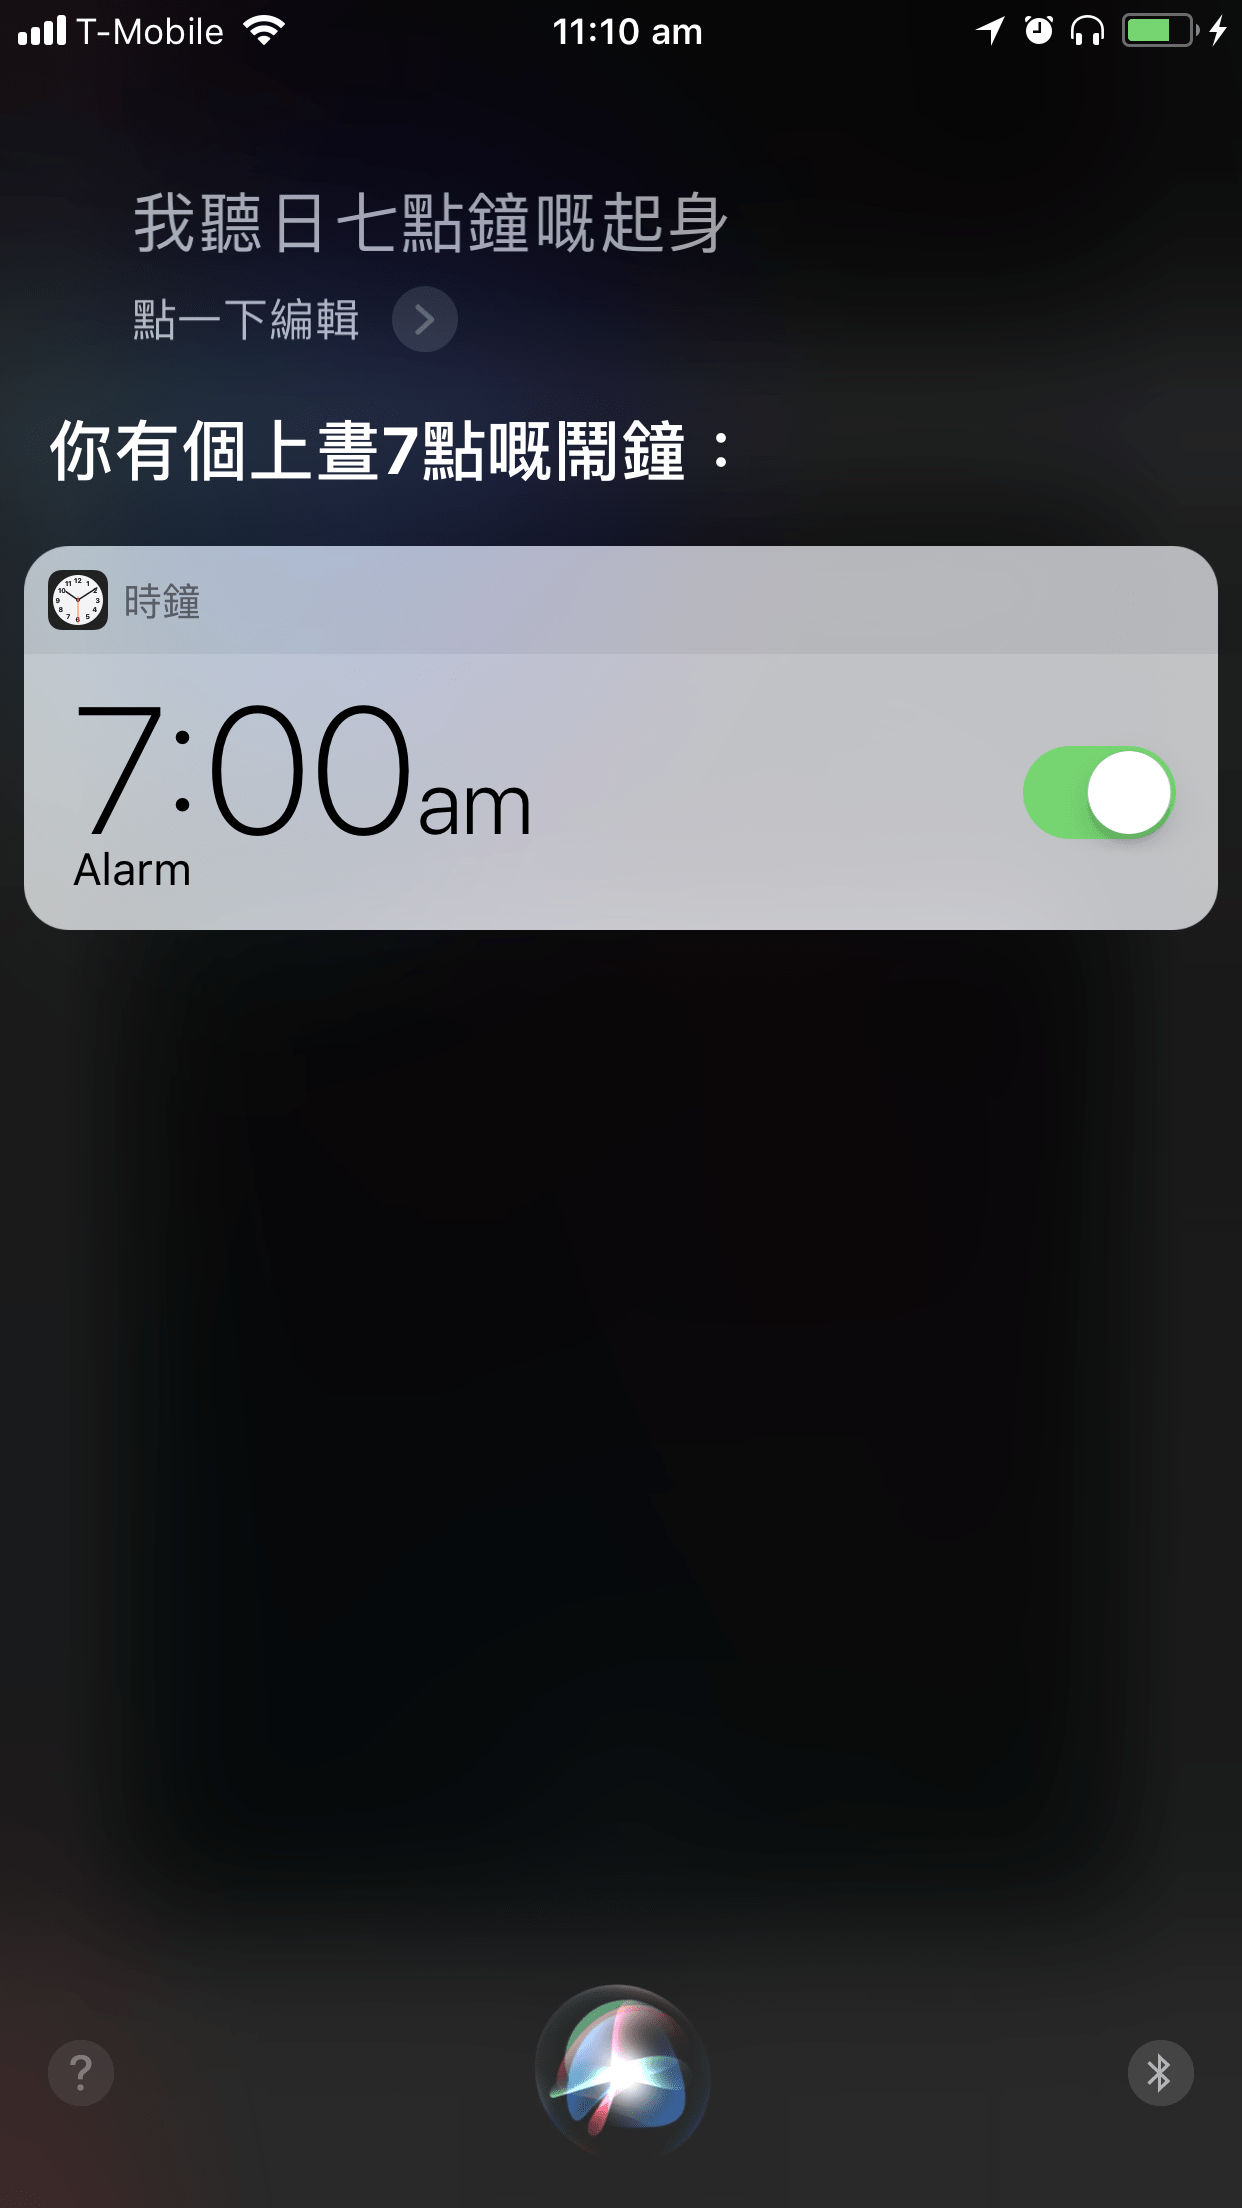 Image of Siri on iPhone being asked to set a 7am alarm, in Cantonese Chinese.